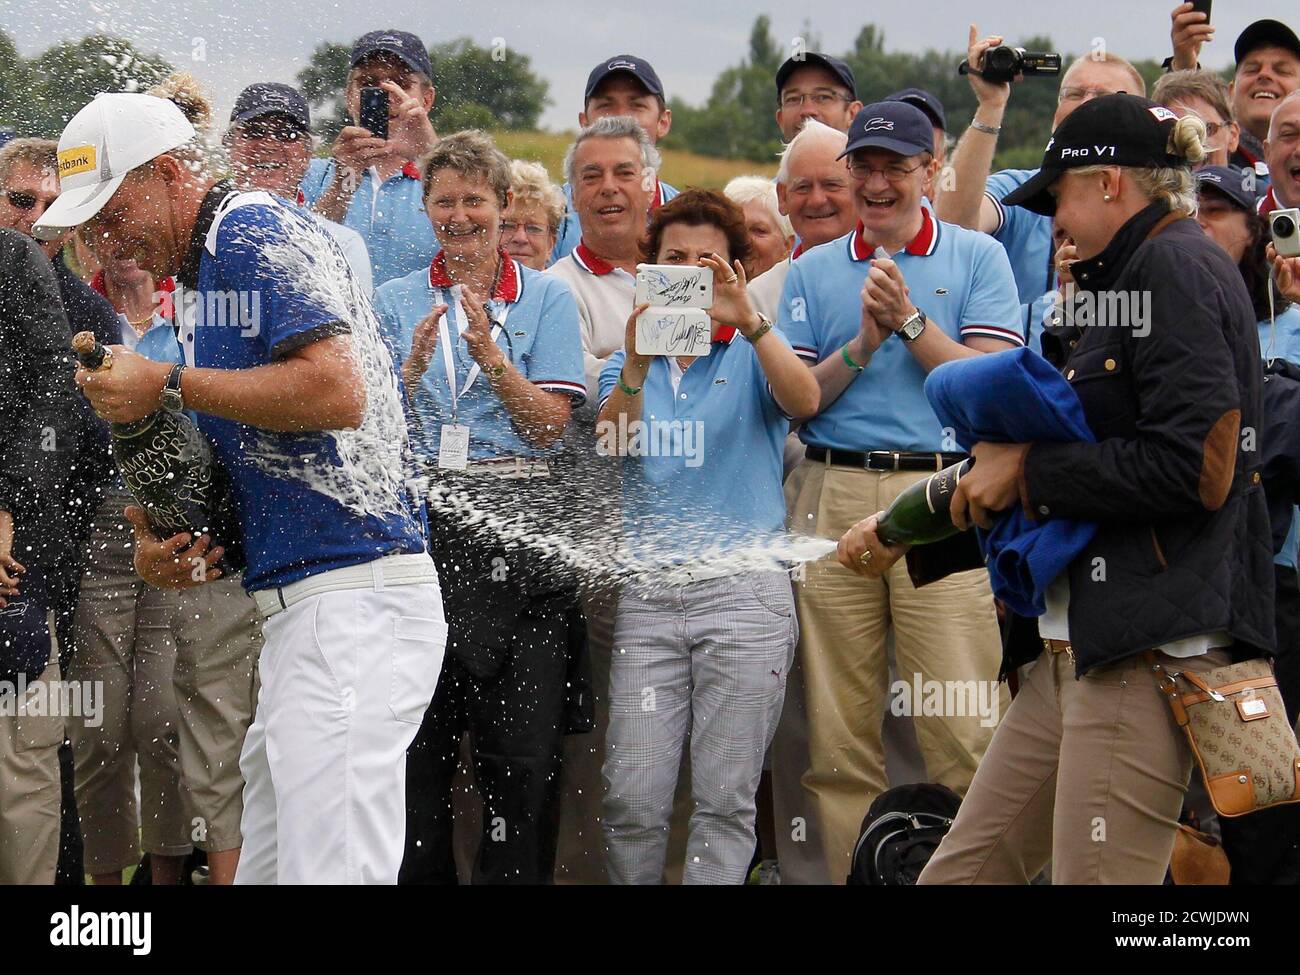 Germany's Marcel Siem (L) is sprayed with champagne by his girlfriend Laura  Polak as they celebrate him winning the French Open golf tournament at the  Golf National course in Saint-Quentin-en-Yvelines, near Paris